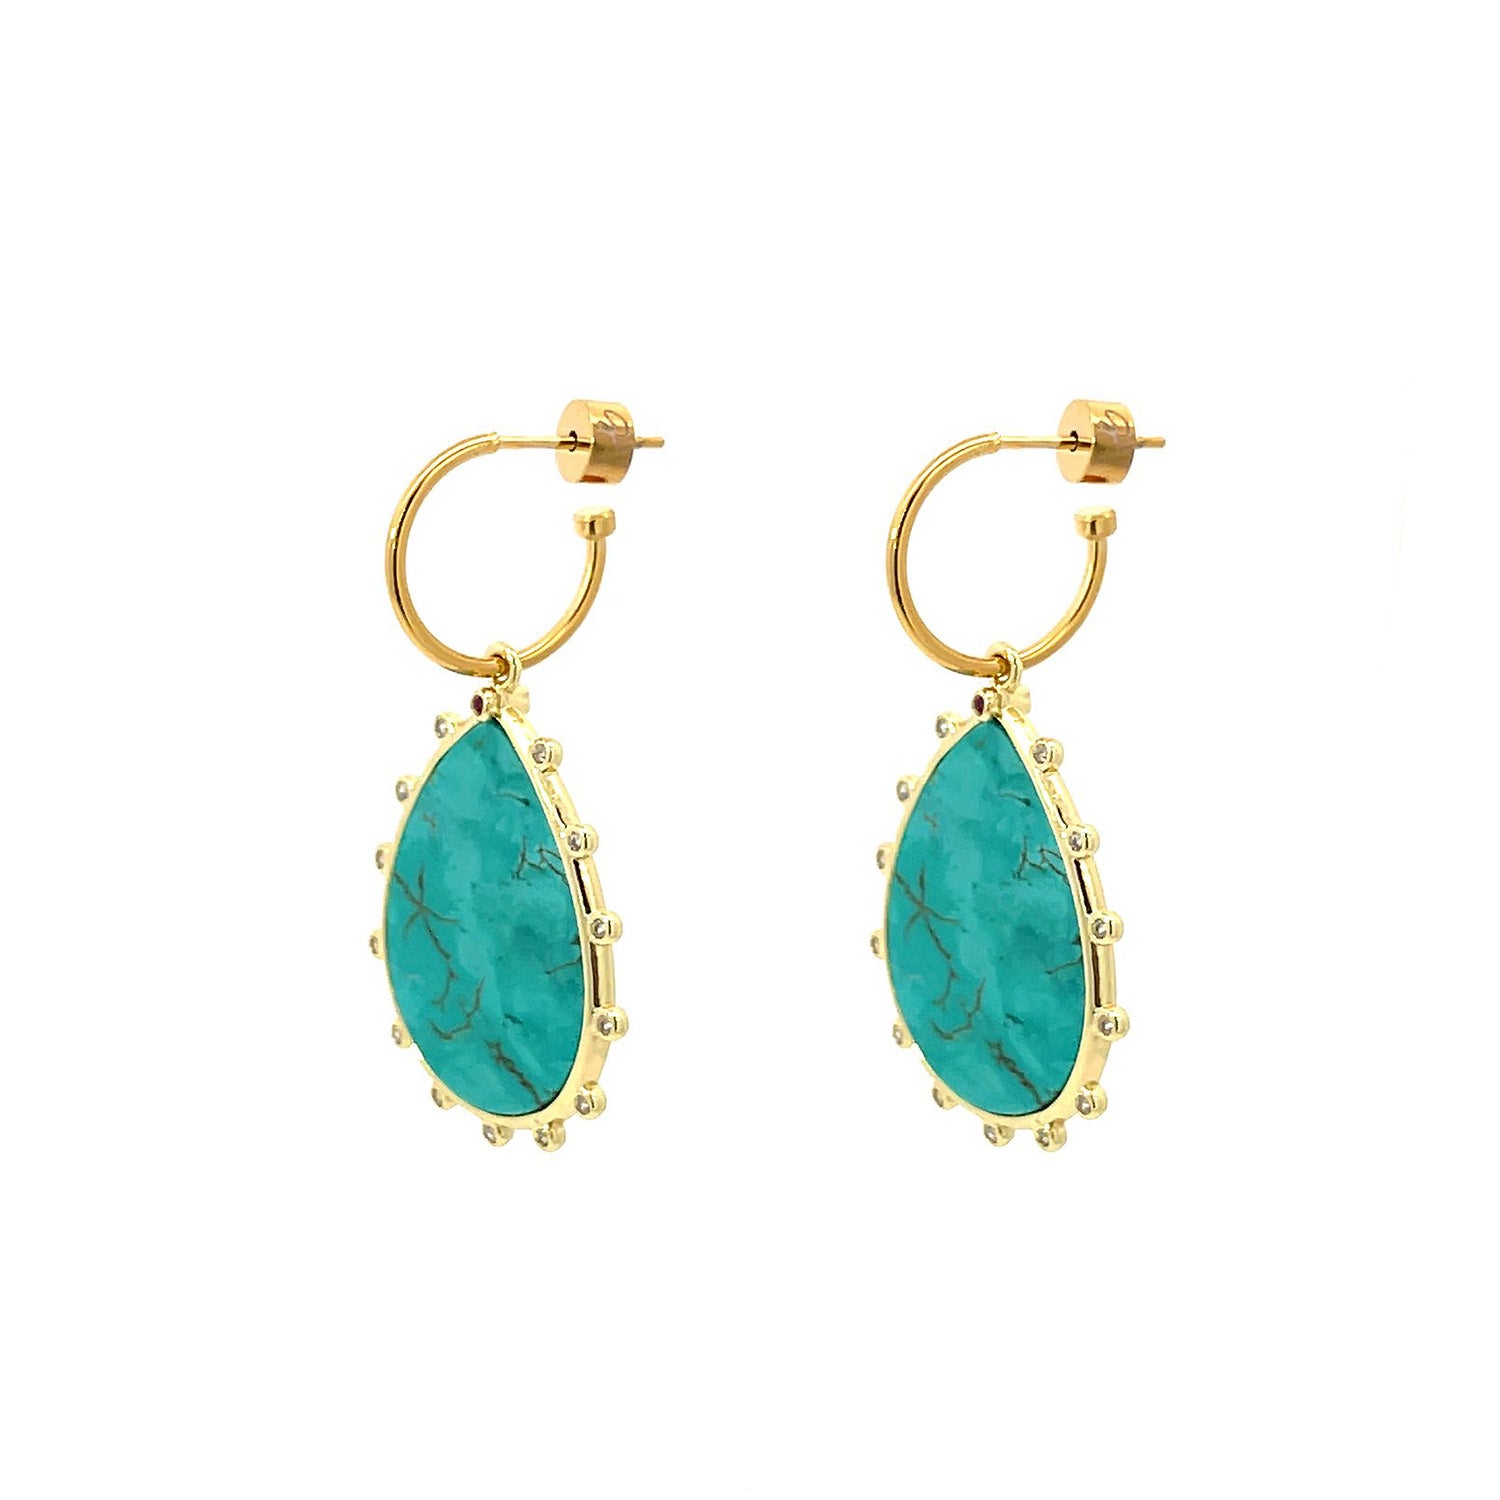 Discover Turquoise Drop Earrings Online - Gosia Orlowska